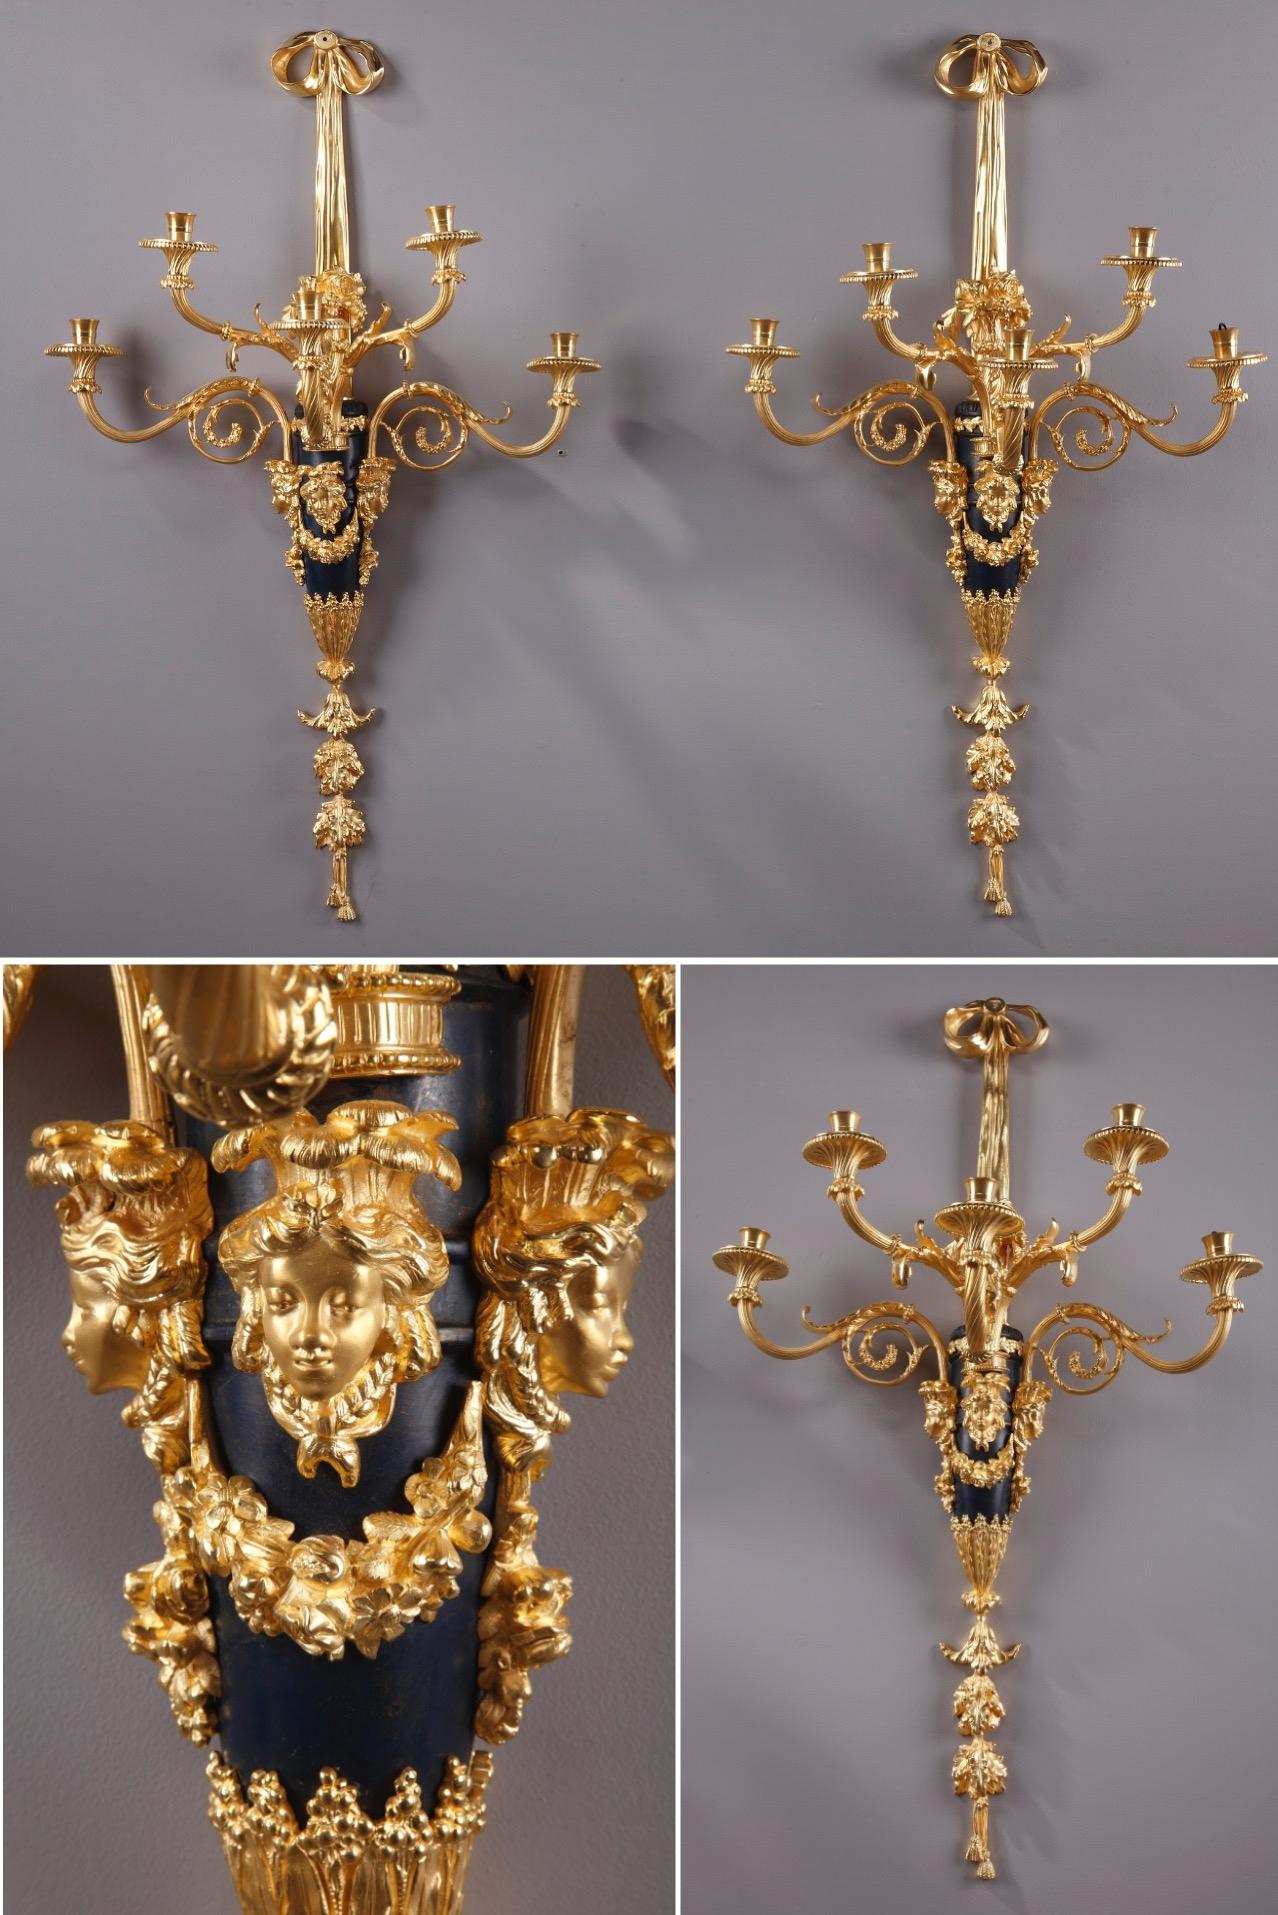 This outstanding pair of gilt and patinated bronze sconces are beautifully designed in Louis XVI style. Of monumental size and opulent design, these stunning 5-light pieces bear Classical decoration composed of twisted flutes, acanthus and bunches